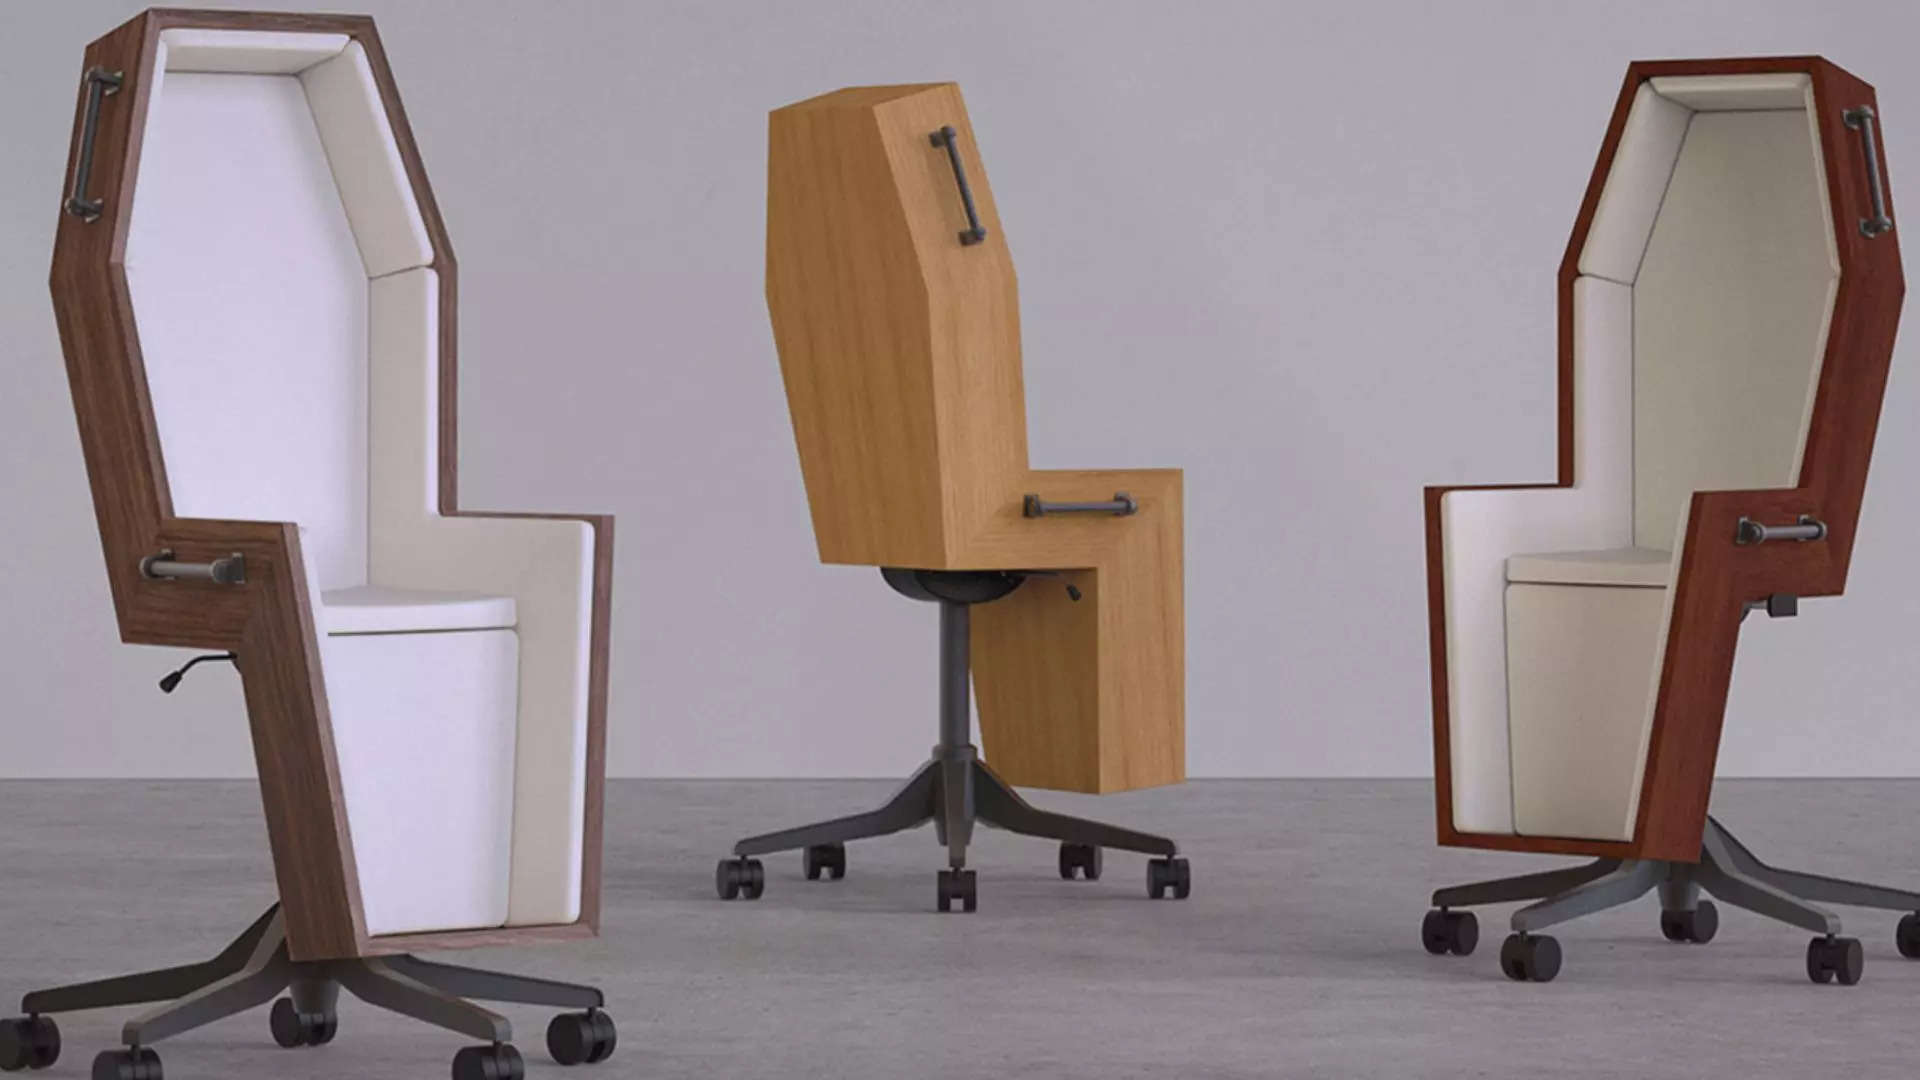 The coffin-shaped "final shift office chair" is a morbid reminder of death for those working long hours | Picture courtesy: Chairbox